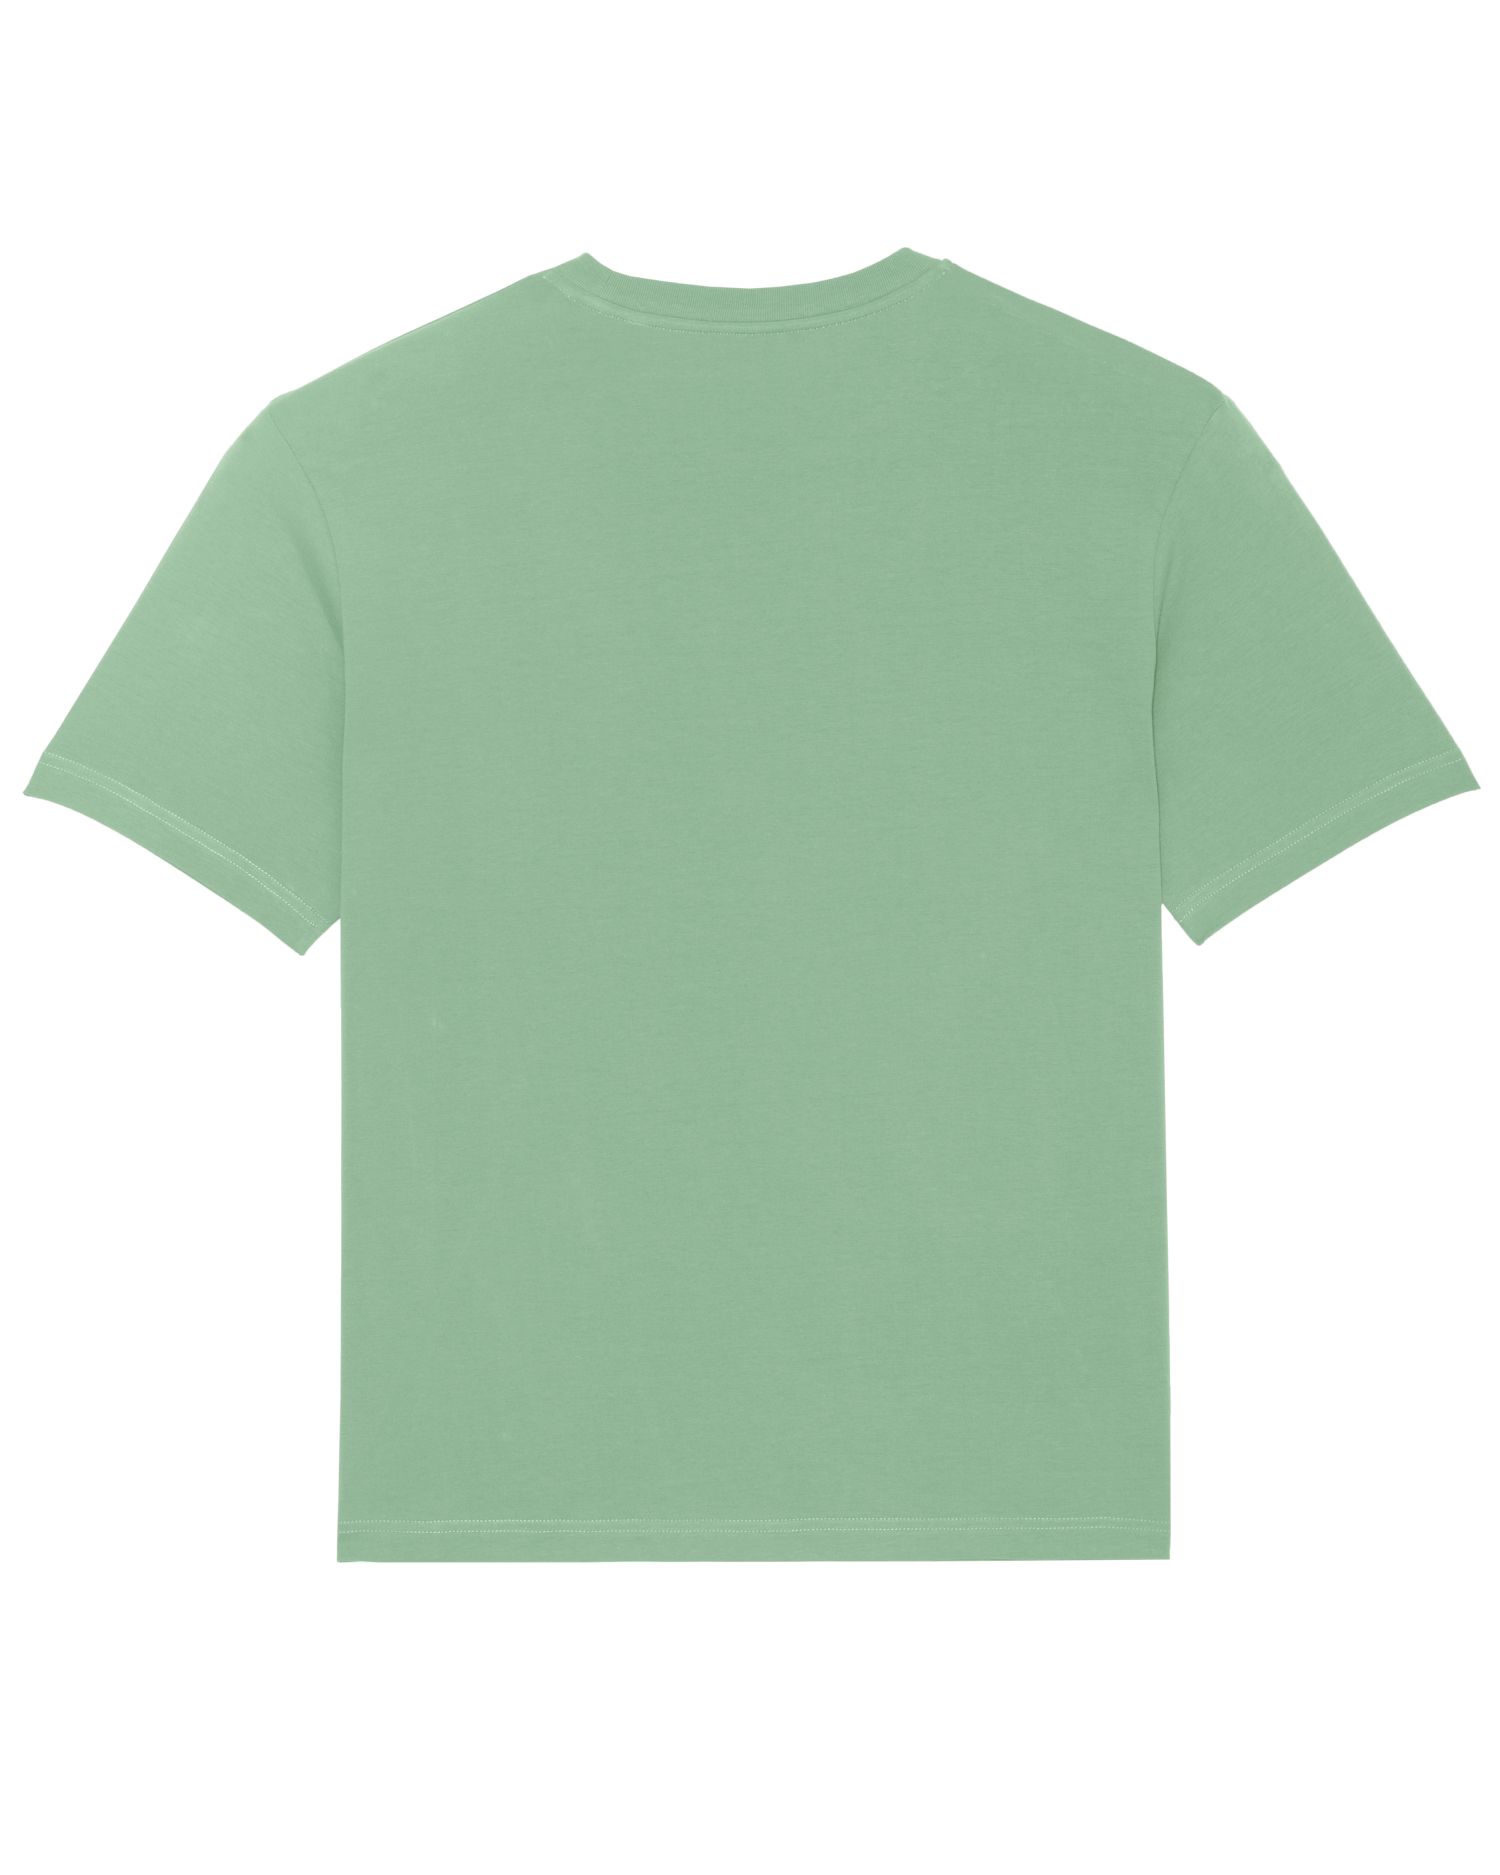 Be Famous Organic Unisex Relaxed T-shirt Dusty Mint 3XL